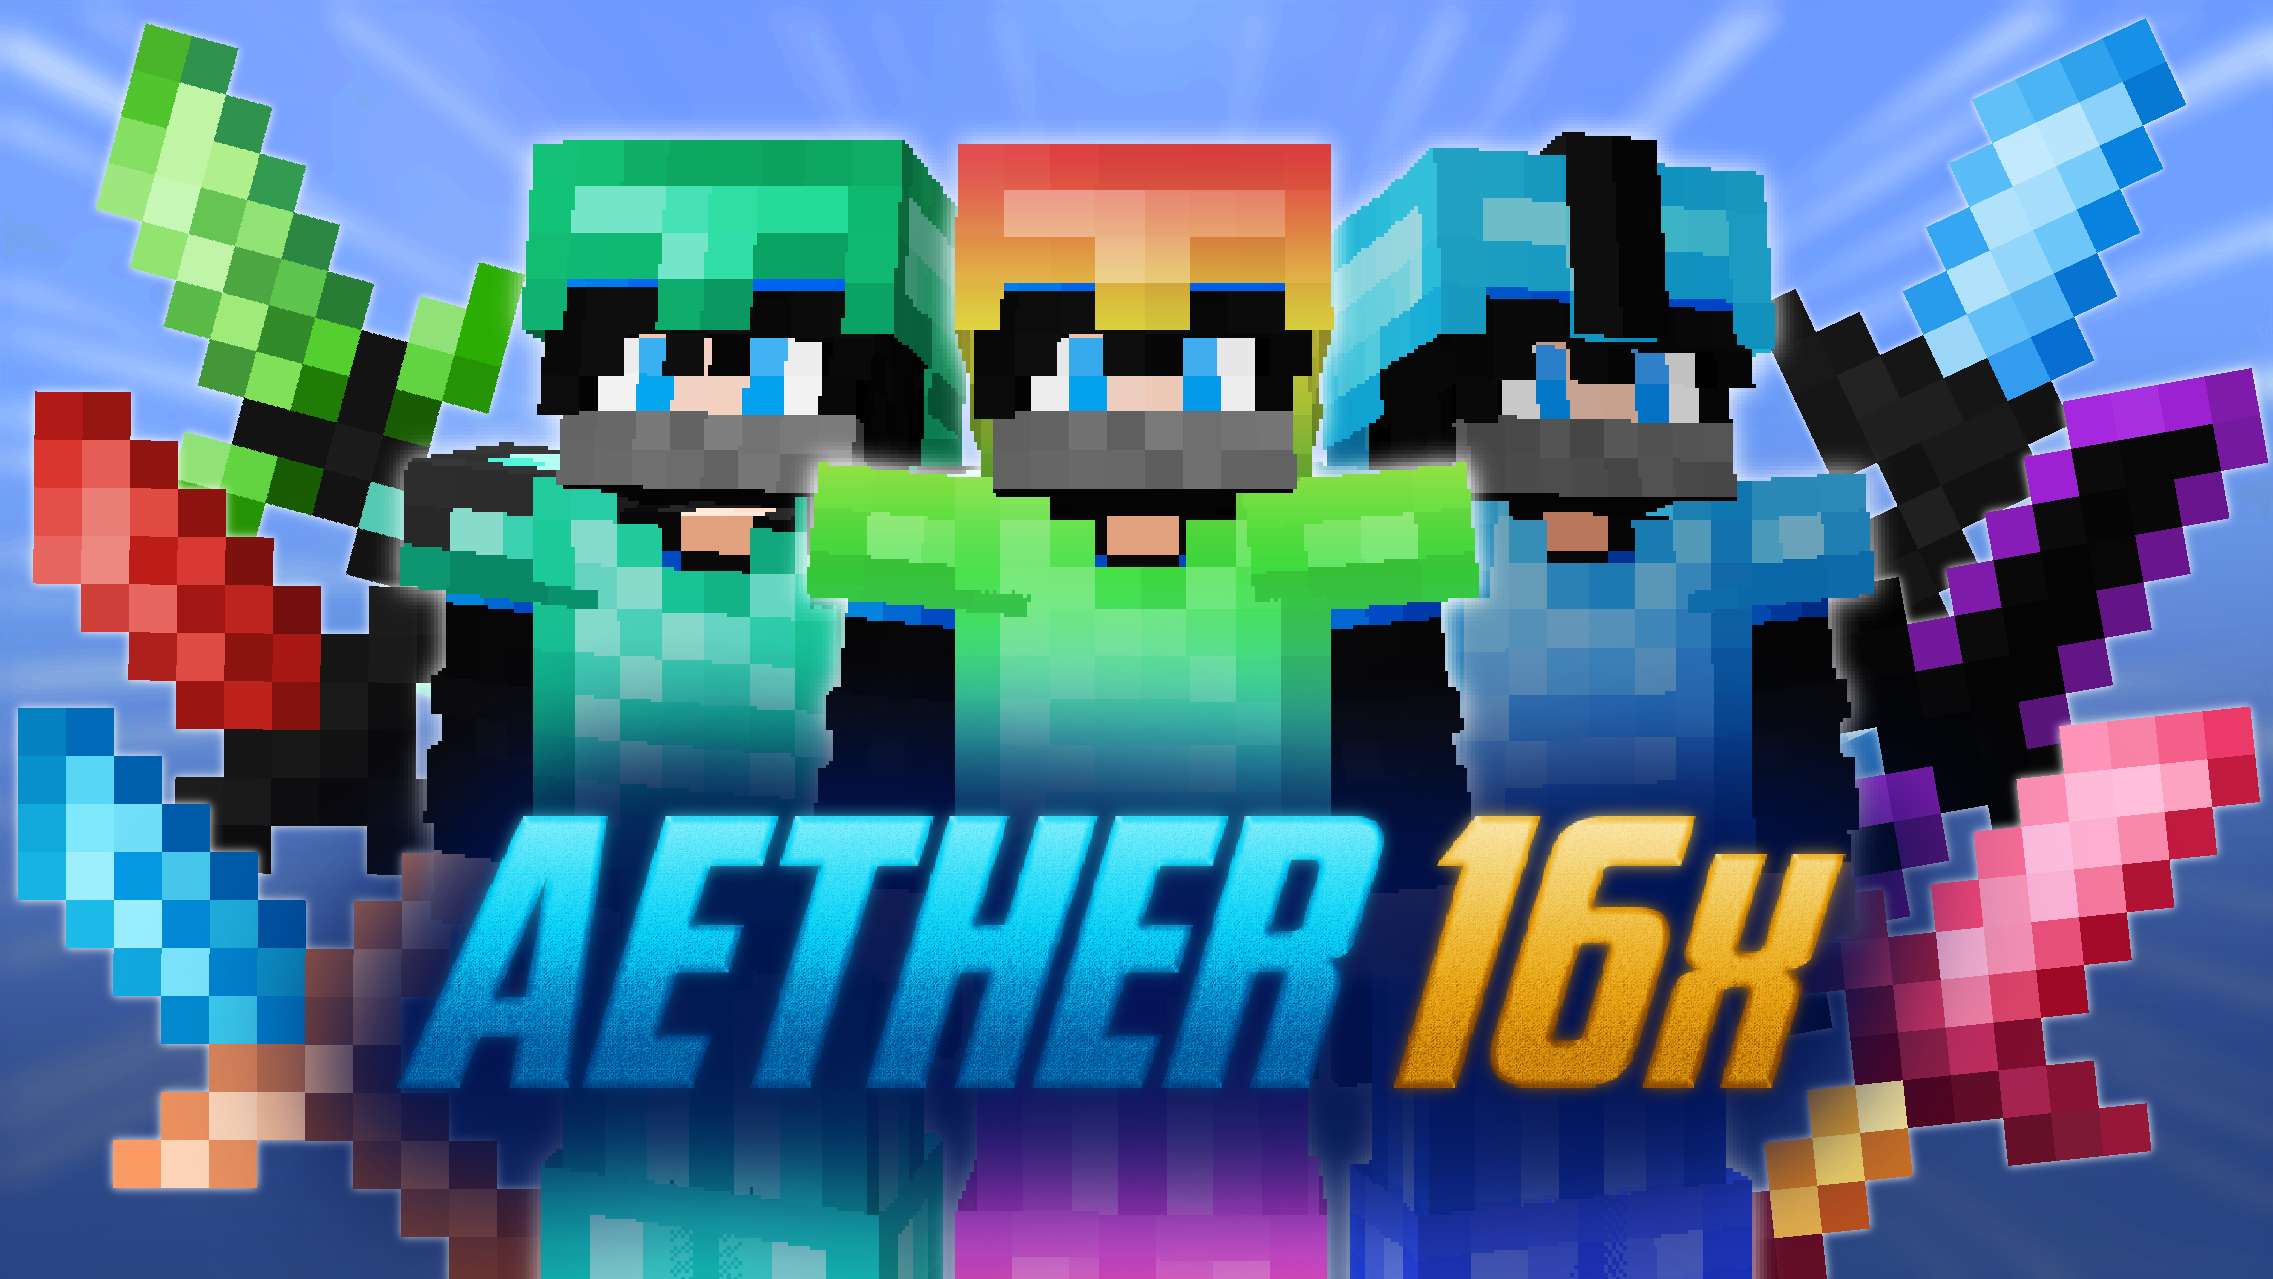 Aether  [Zuhiy] 16x by Mqryo on PvPRP